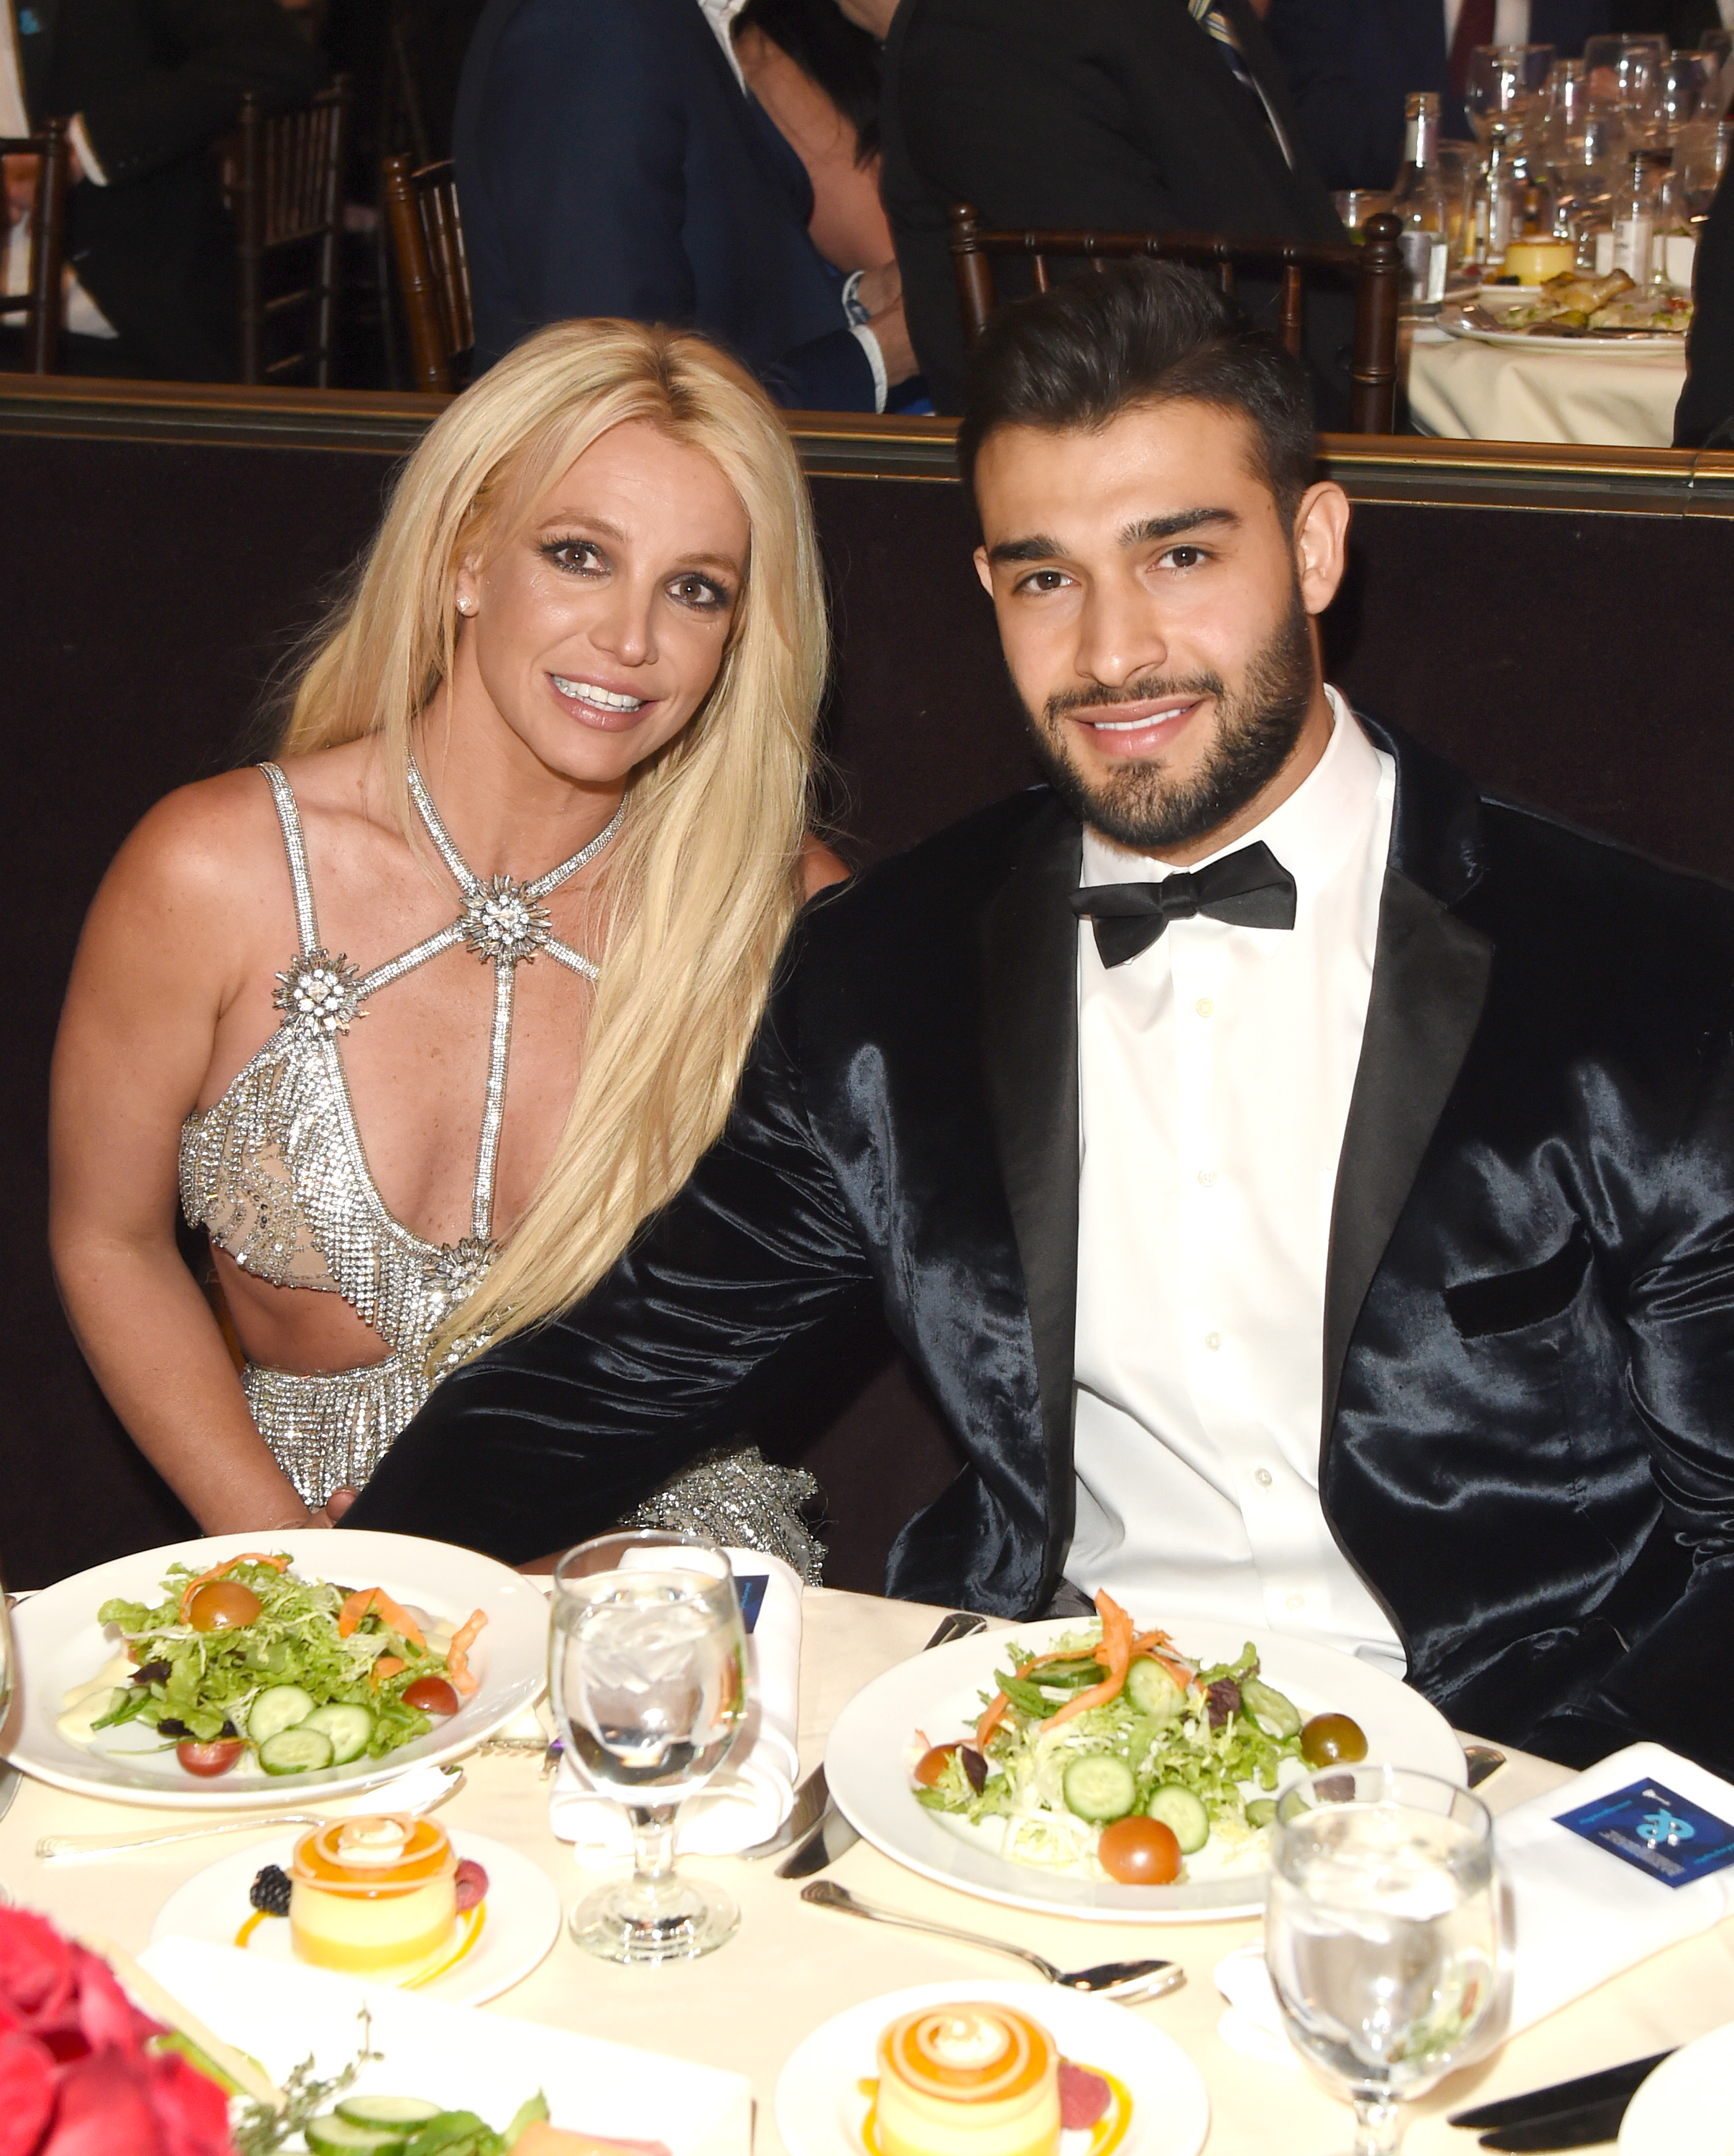 Britney and Sam during happier times at an event